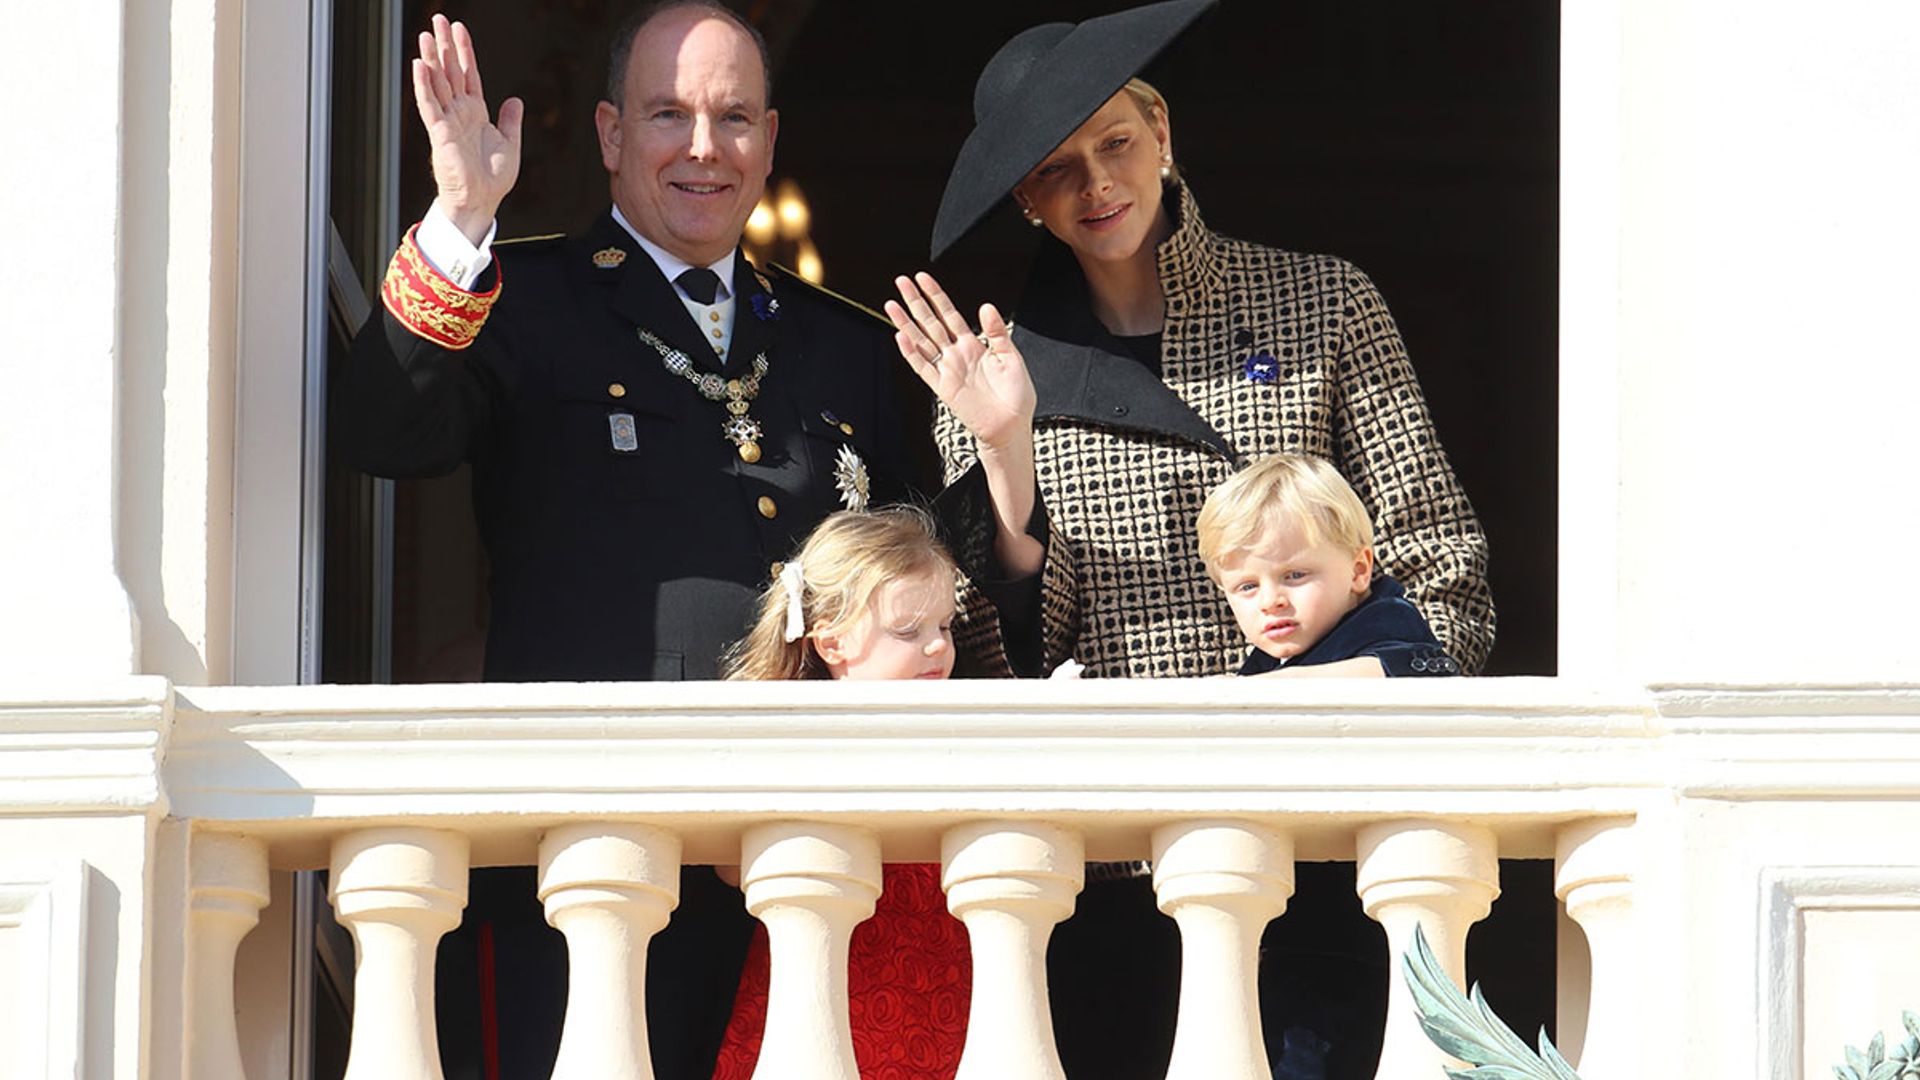 Princess Charlene of Monaco 'thrilled' to be reunited with Prince Albert and their children after operation